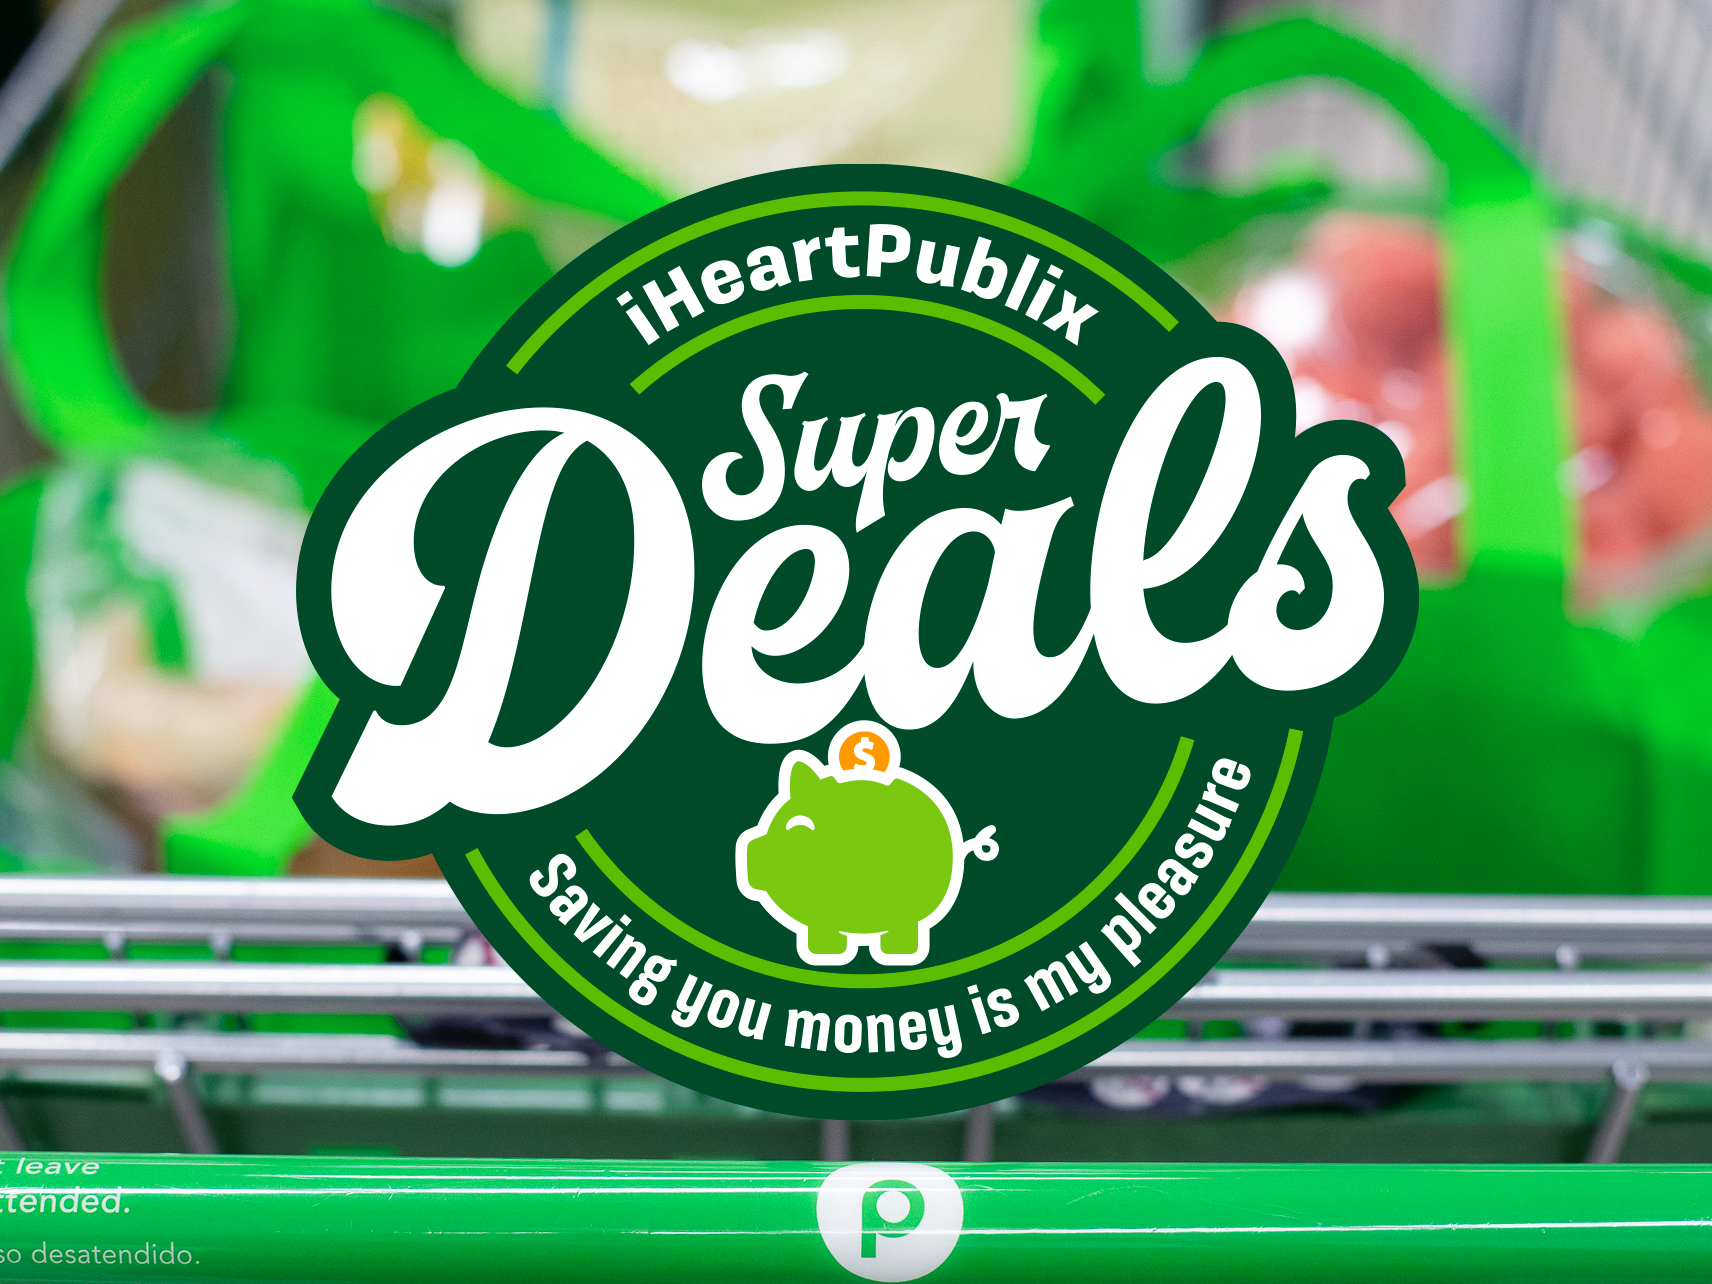 Publix Super Deals Week Of 12/7 To 12/13 (12/6 To 12/12 For Some)